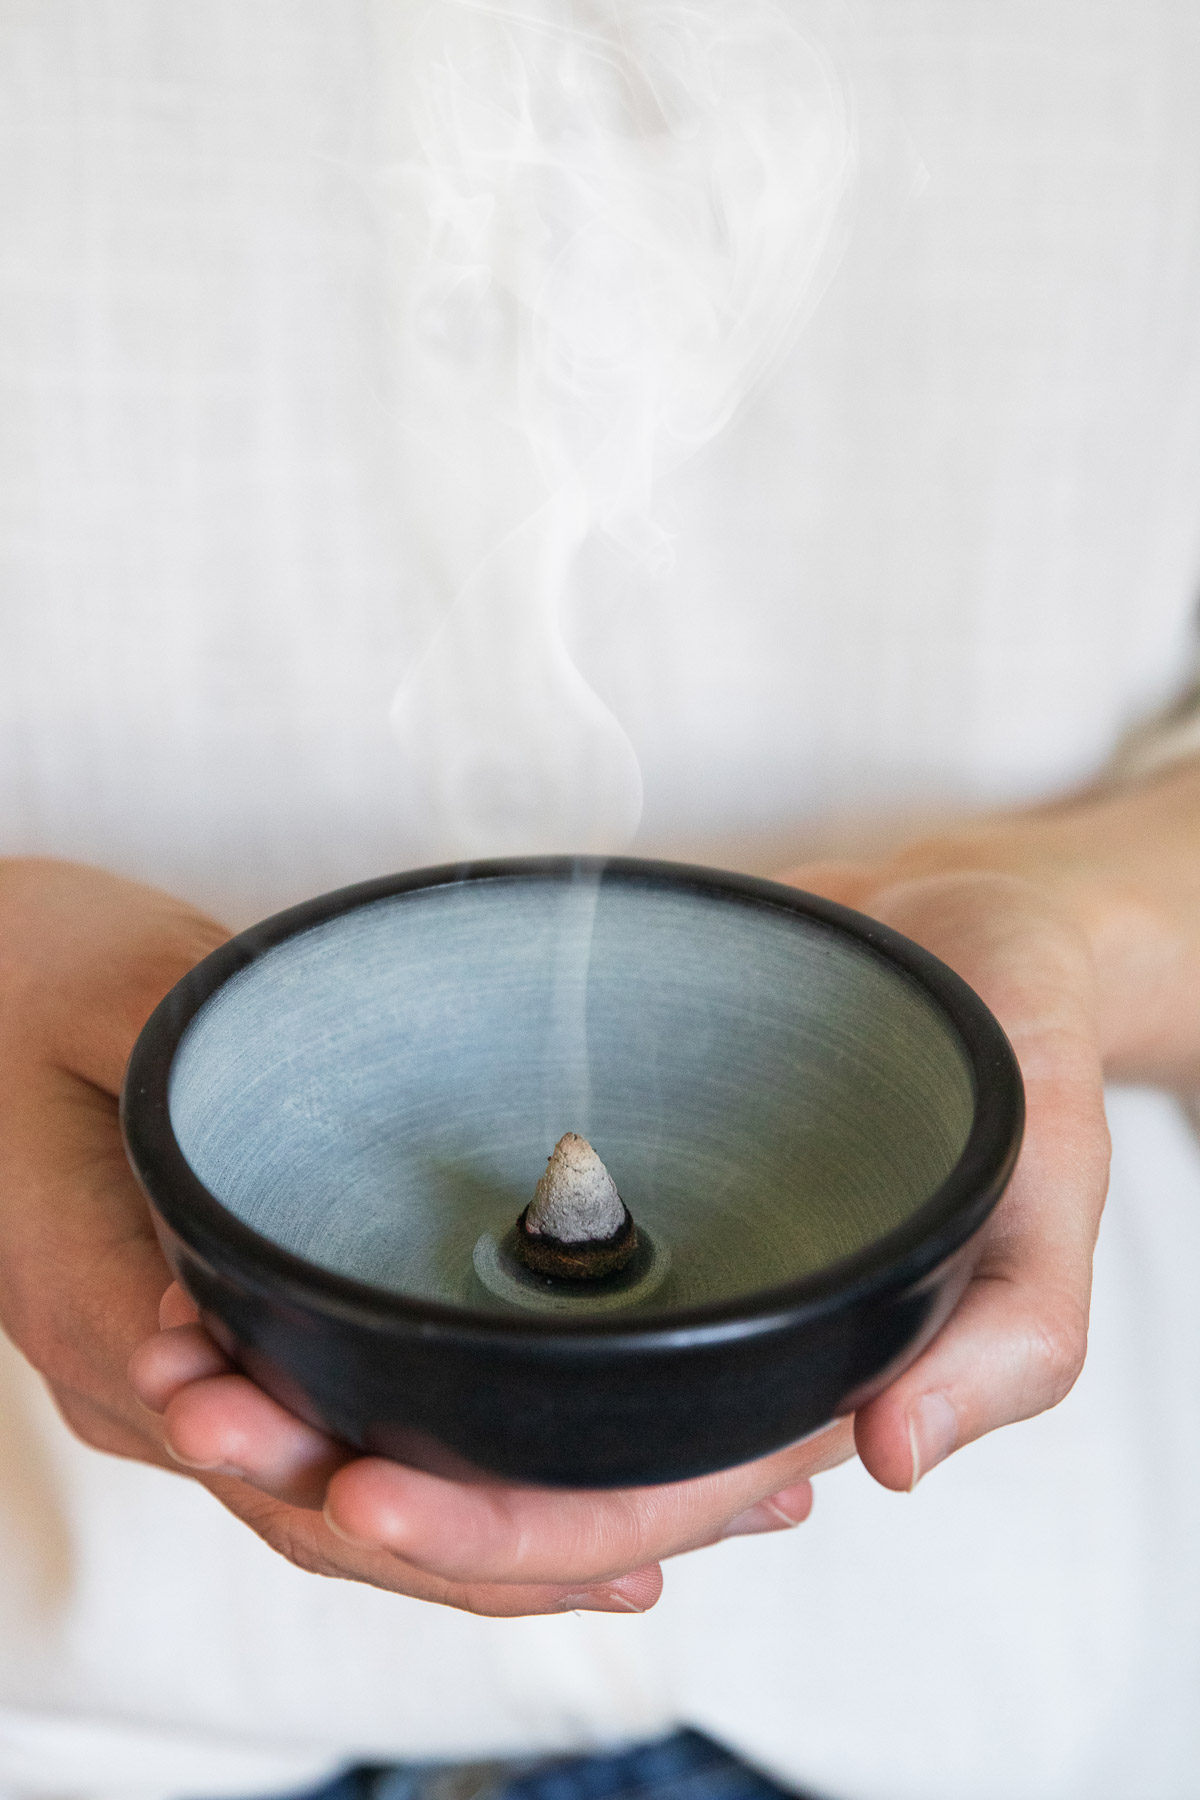 Here’s how to make your own DIY incense with just 3 ingredients.